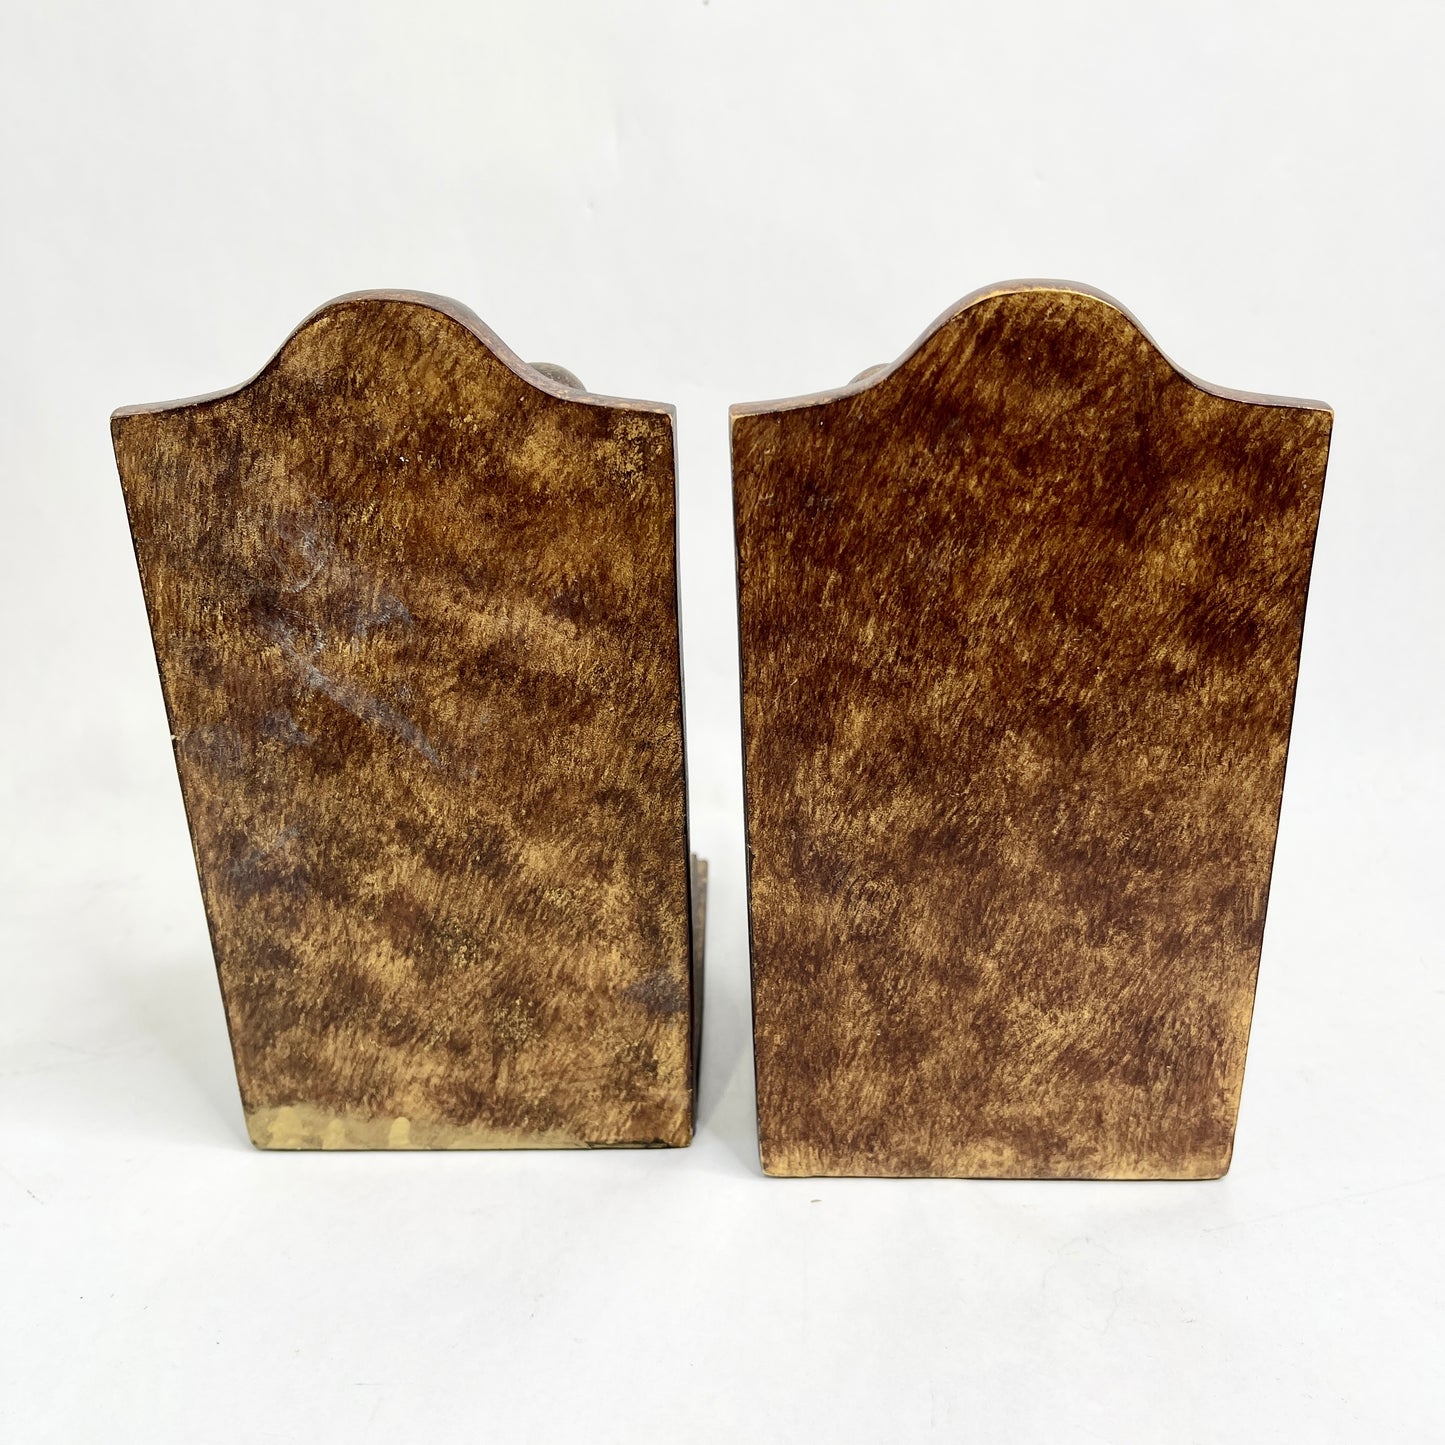 Vintage Bookends - Leaf Scroll Design - Price is for Pair